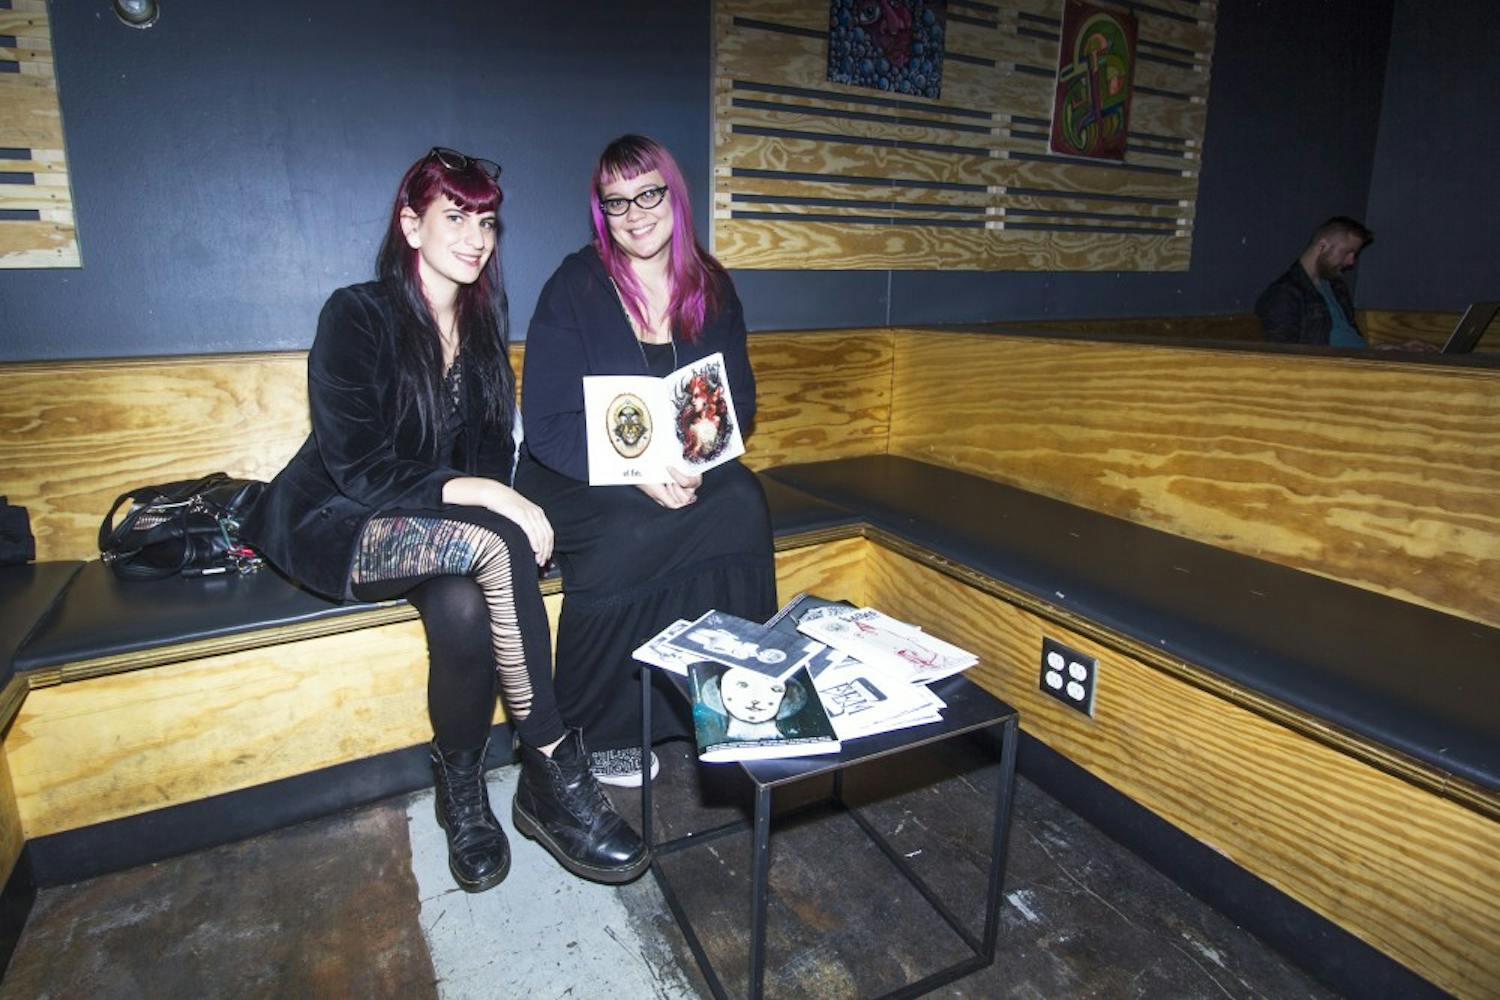 Charissa Lucille and Marna Kay owners of Wasted Ink Zine Distro pose for a photo on Nov 19, 2015 at Cartel Coffee in Tempe.